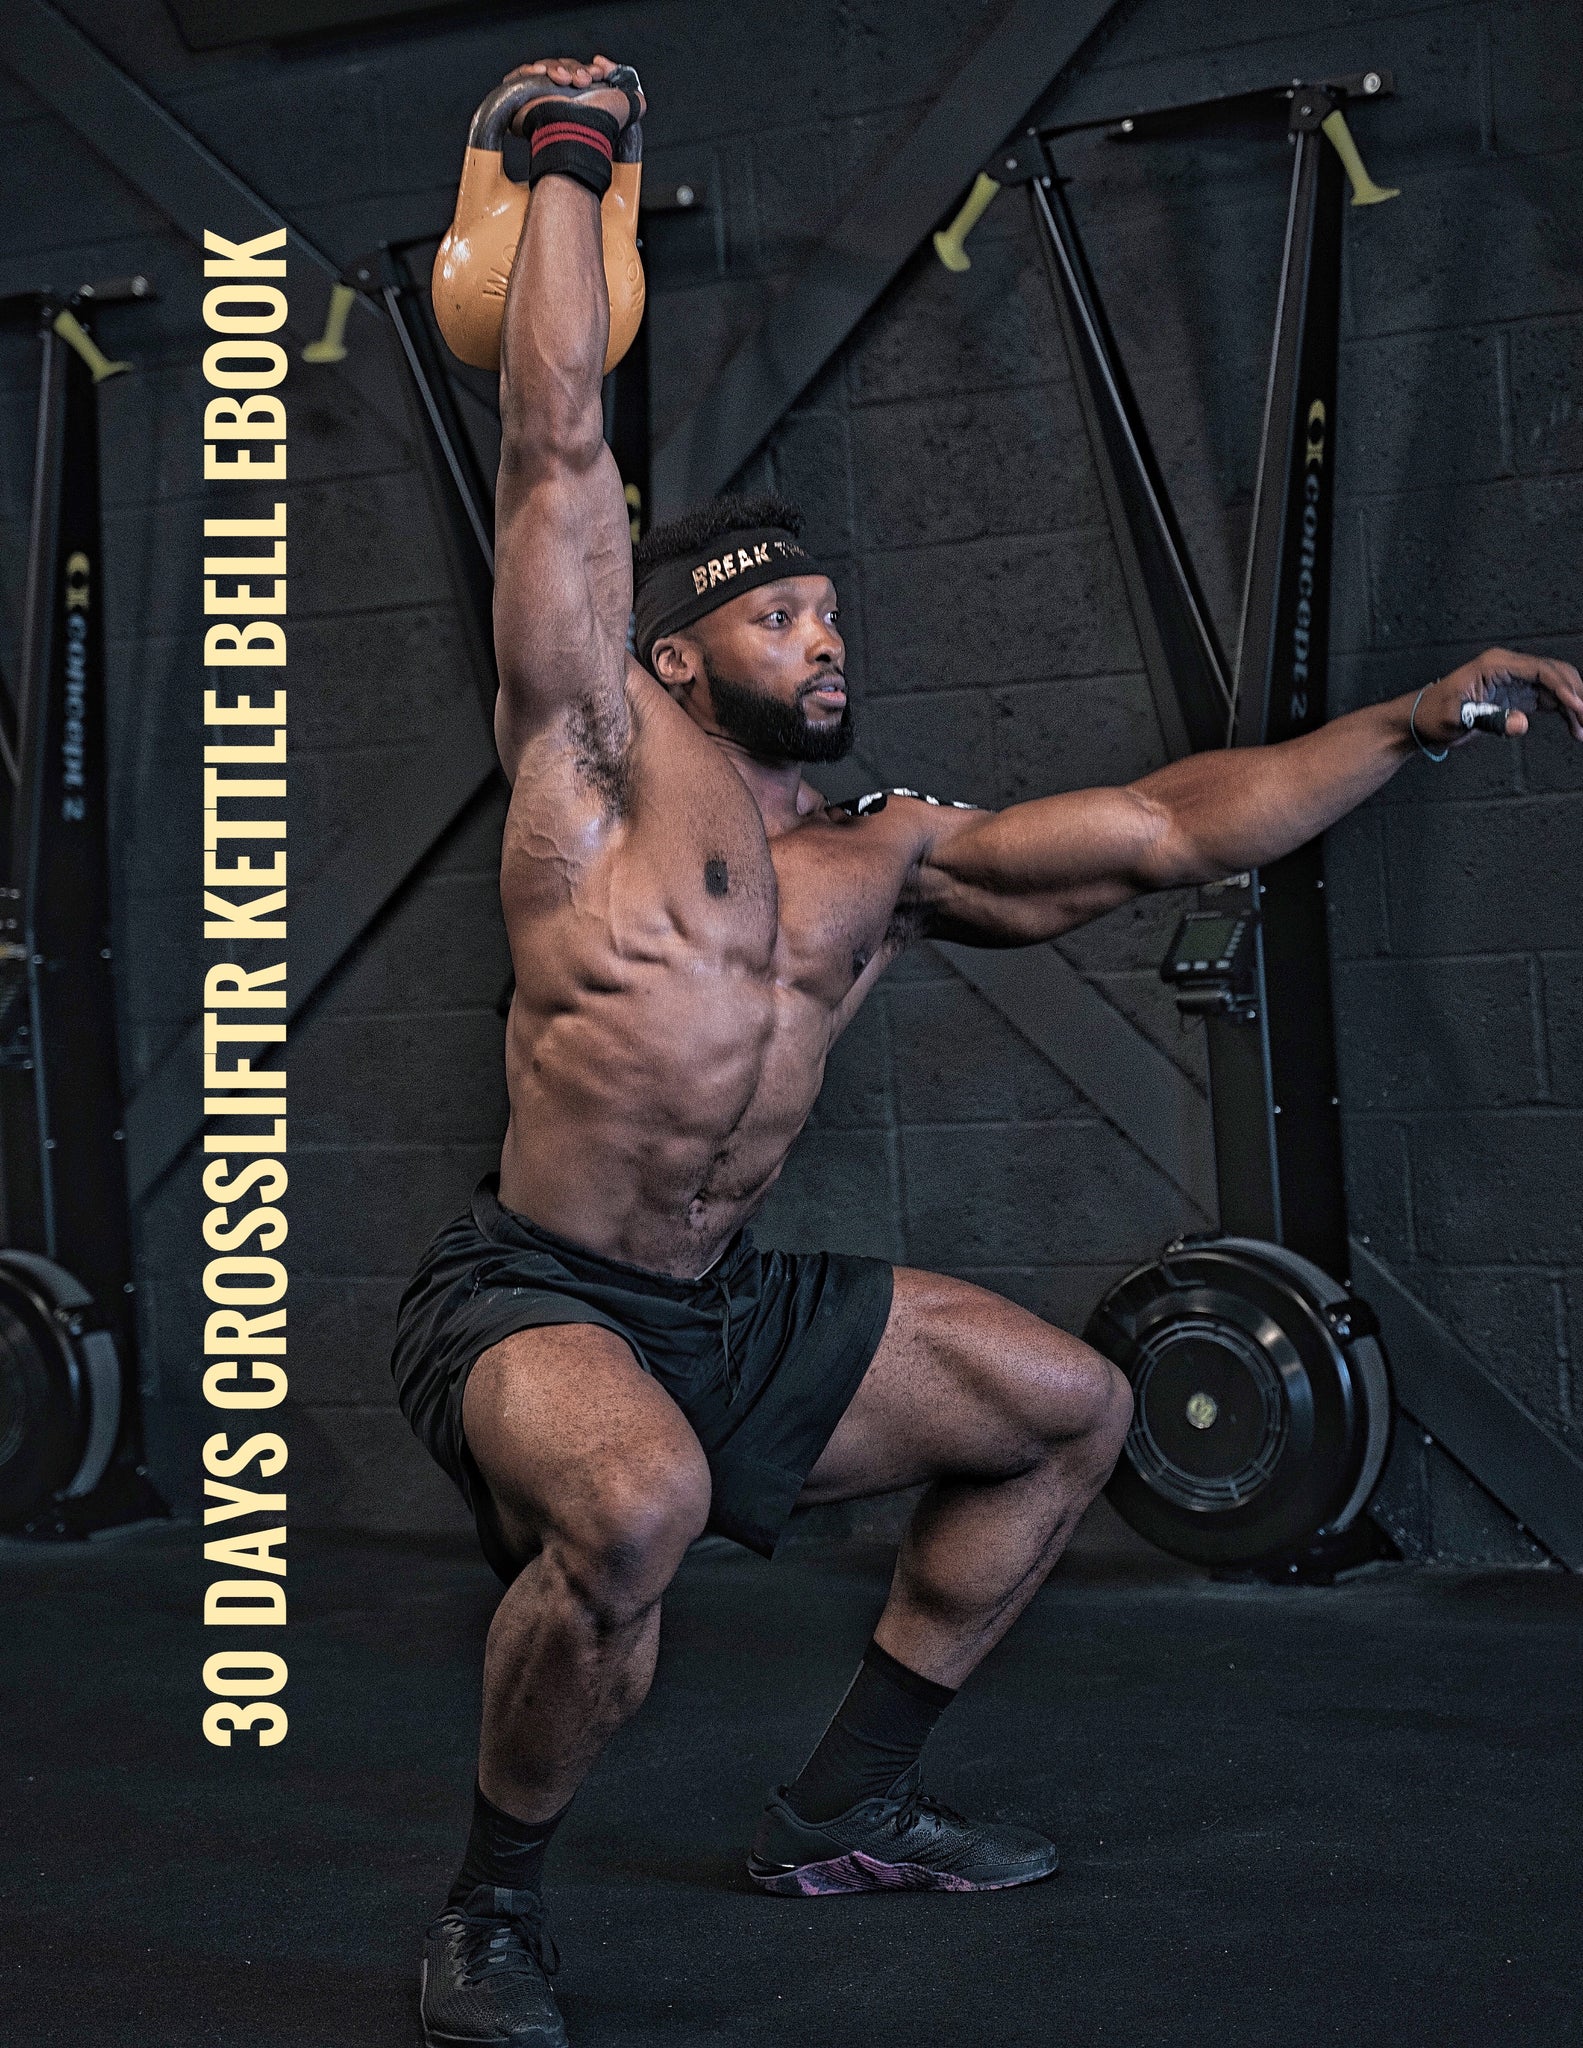 Kettlebell Training for Beginners: The Basics: Swings, Snatches, Get Ups,  and More (Jade Mountain Workout Series Book 3) eBook : McClendon, Whit:  : Kindle Store